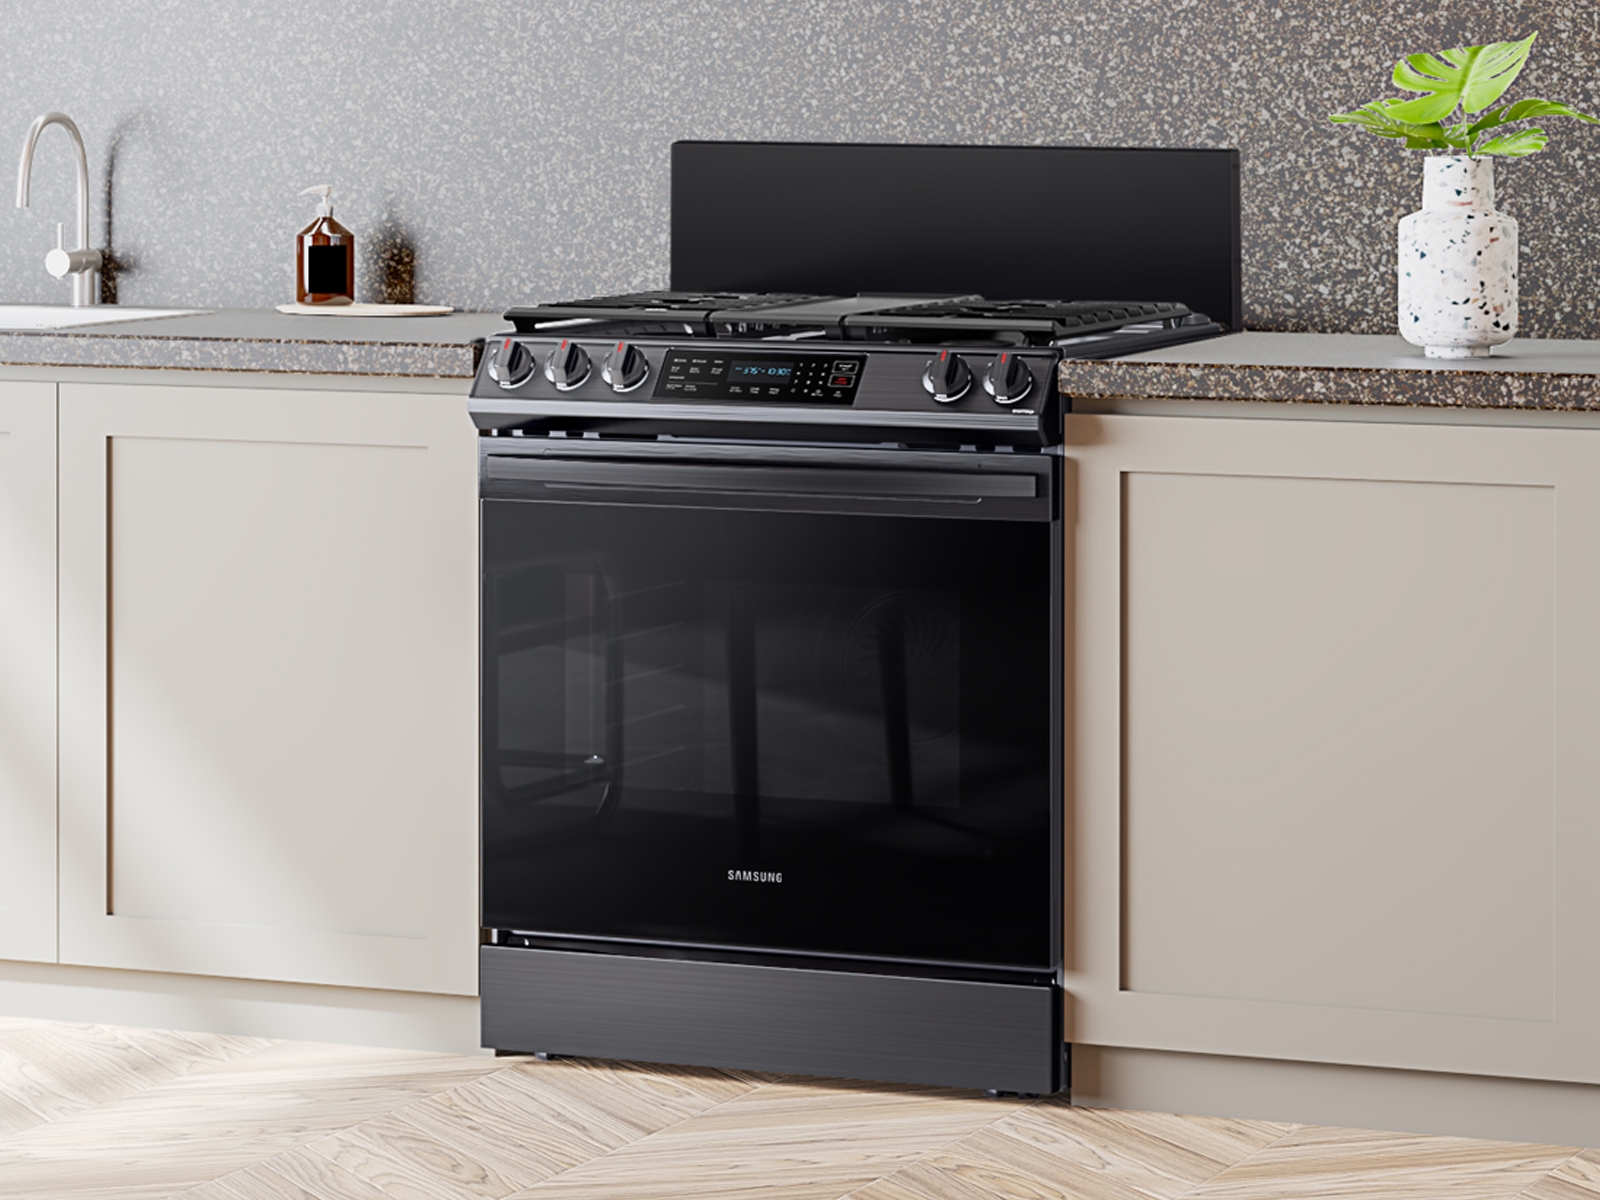 Samsung NY63T8751SG 30 Inch Slide-in Dual Fuel Smart Range with 5 Sealed  Burners, 6.3 Cu. Ft. Oven Capacity, Air Fry, Steam + Self Clean, Flex Duo™,  Smart Dial, Wi-Fi, Voice Control, Sabbath